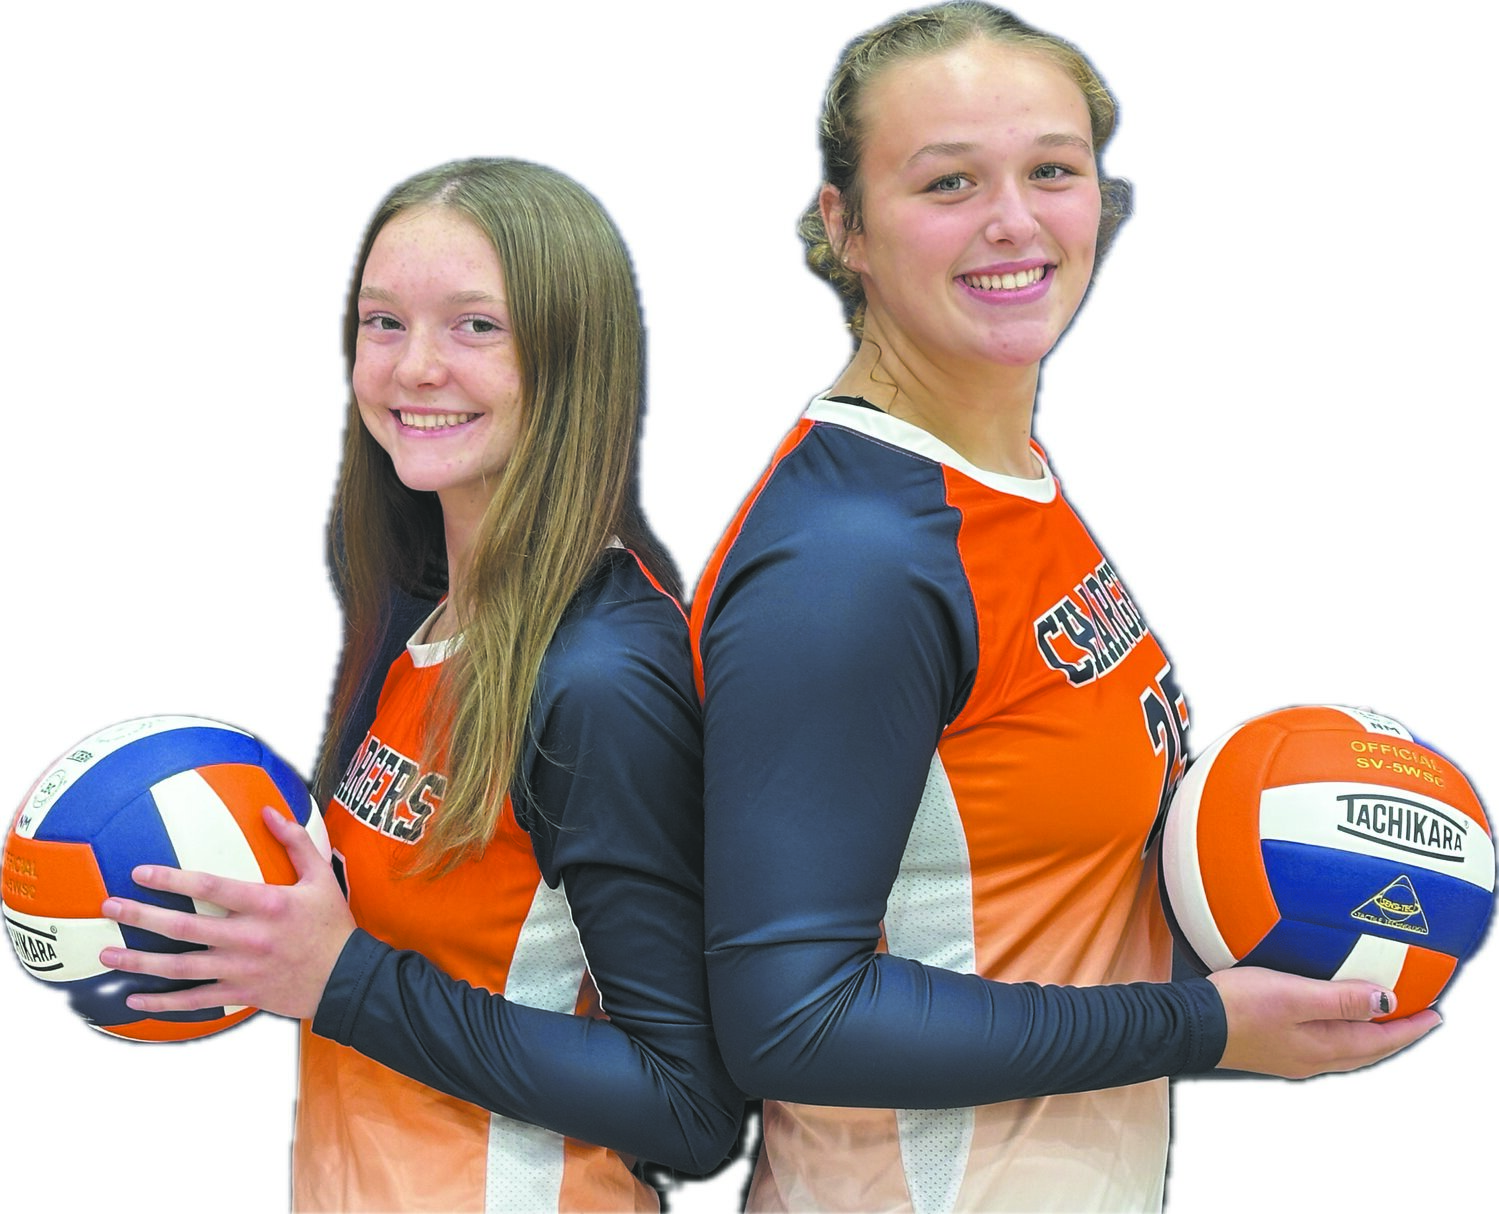 North Montgomery’s Annabel Anderson (left) and Piper Ramey (right) were the duo that led the Chargers all season long. North captured their first county title since 2017 and their most wins since that same 2017 season.